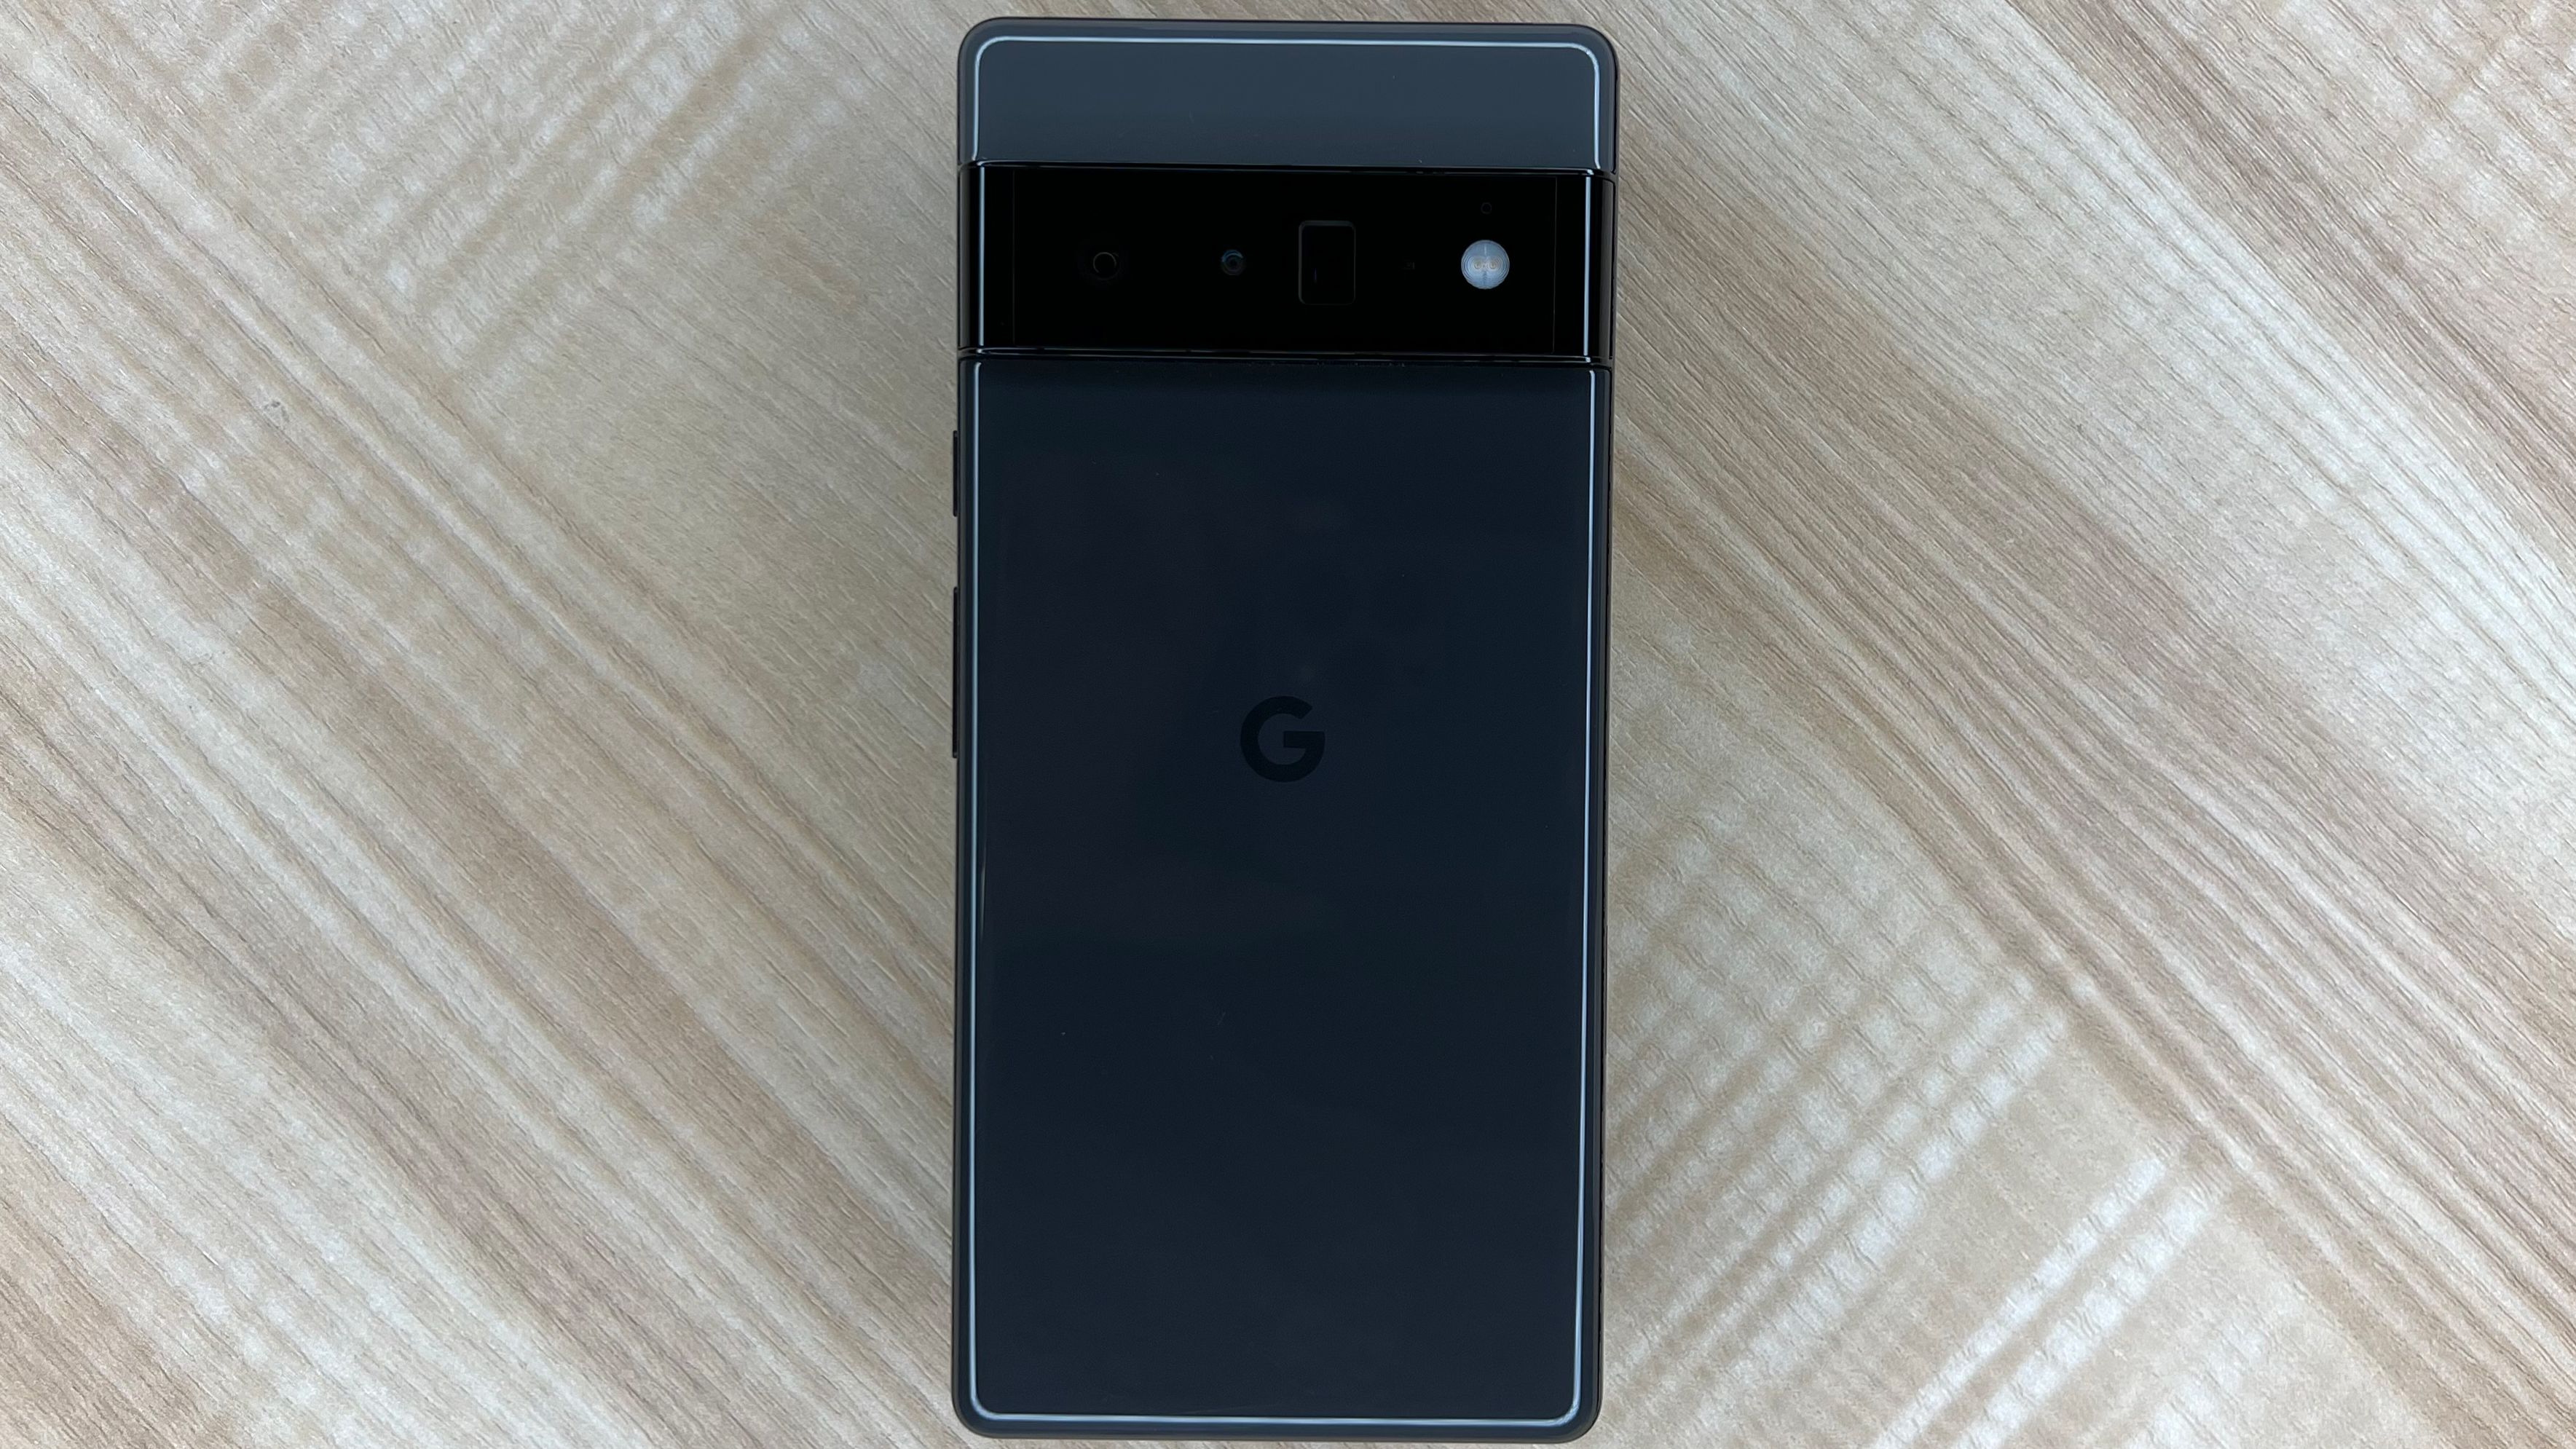 Google Pixel 6 Pro Review: A Great Flagship